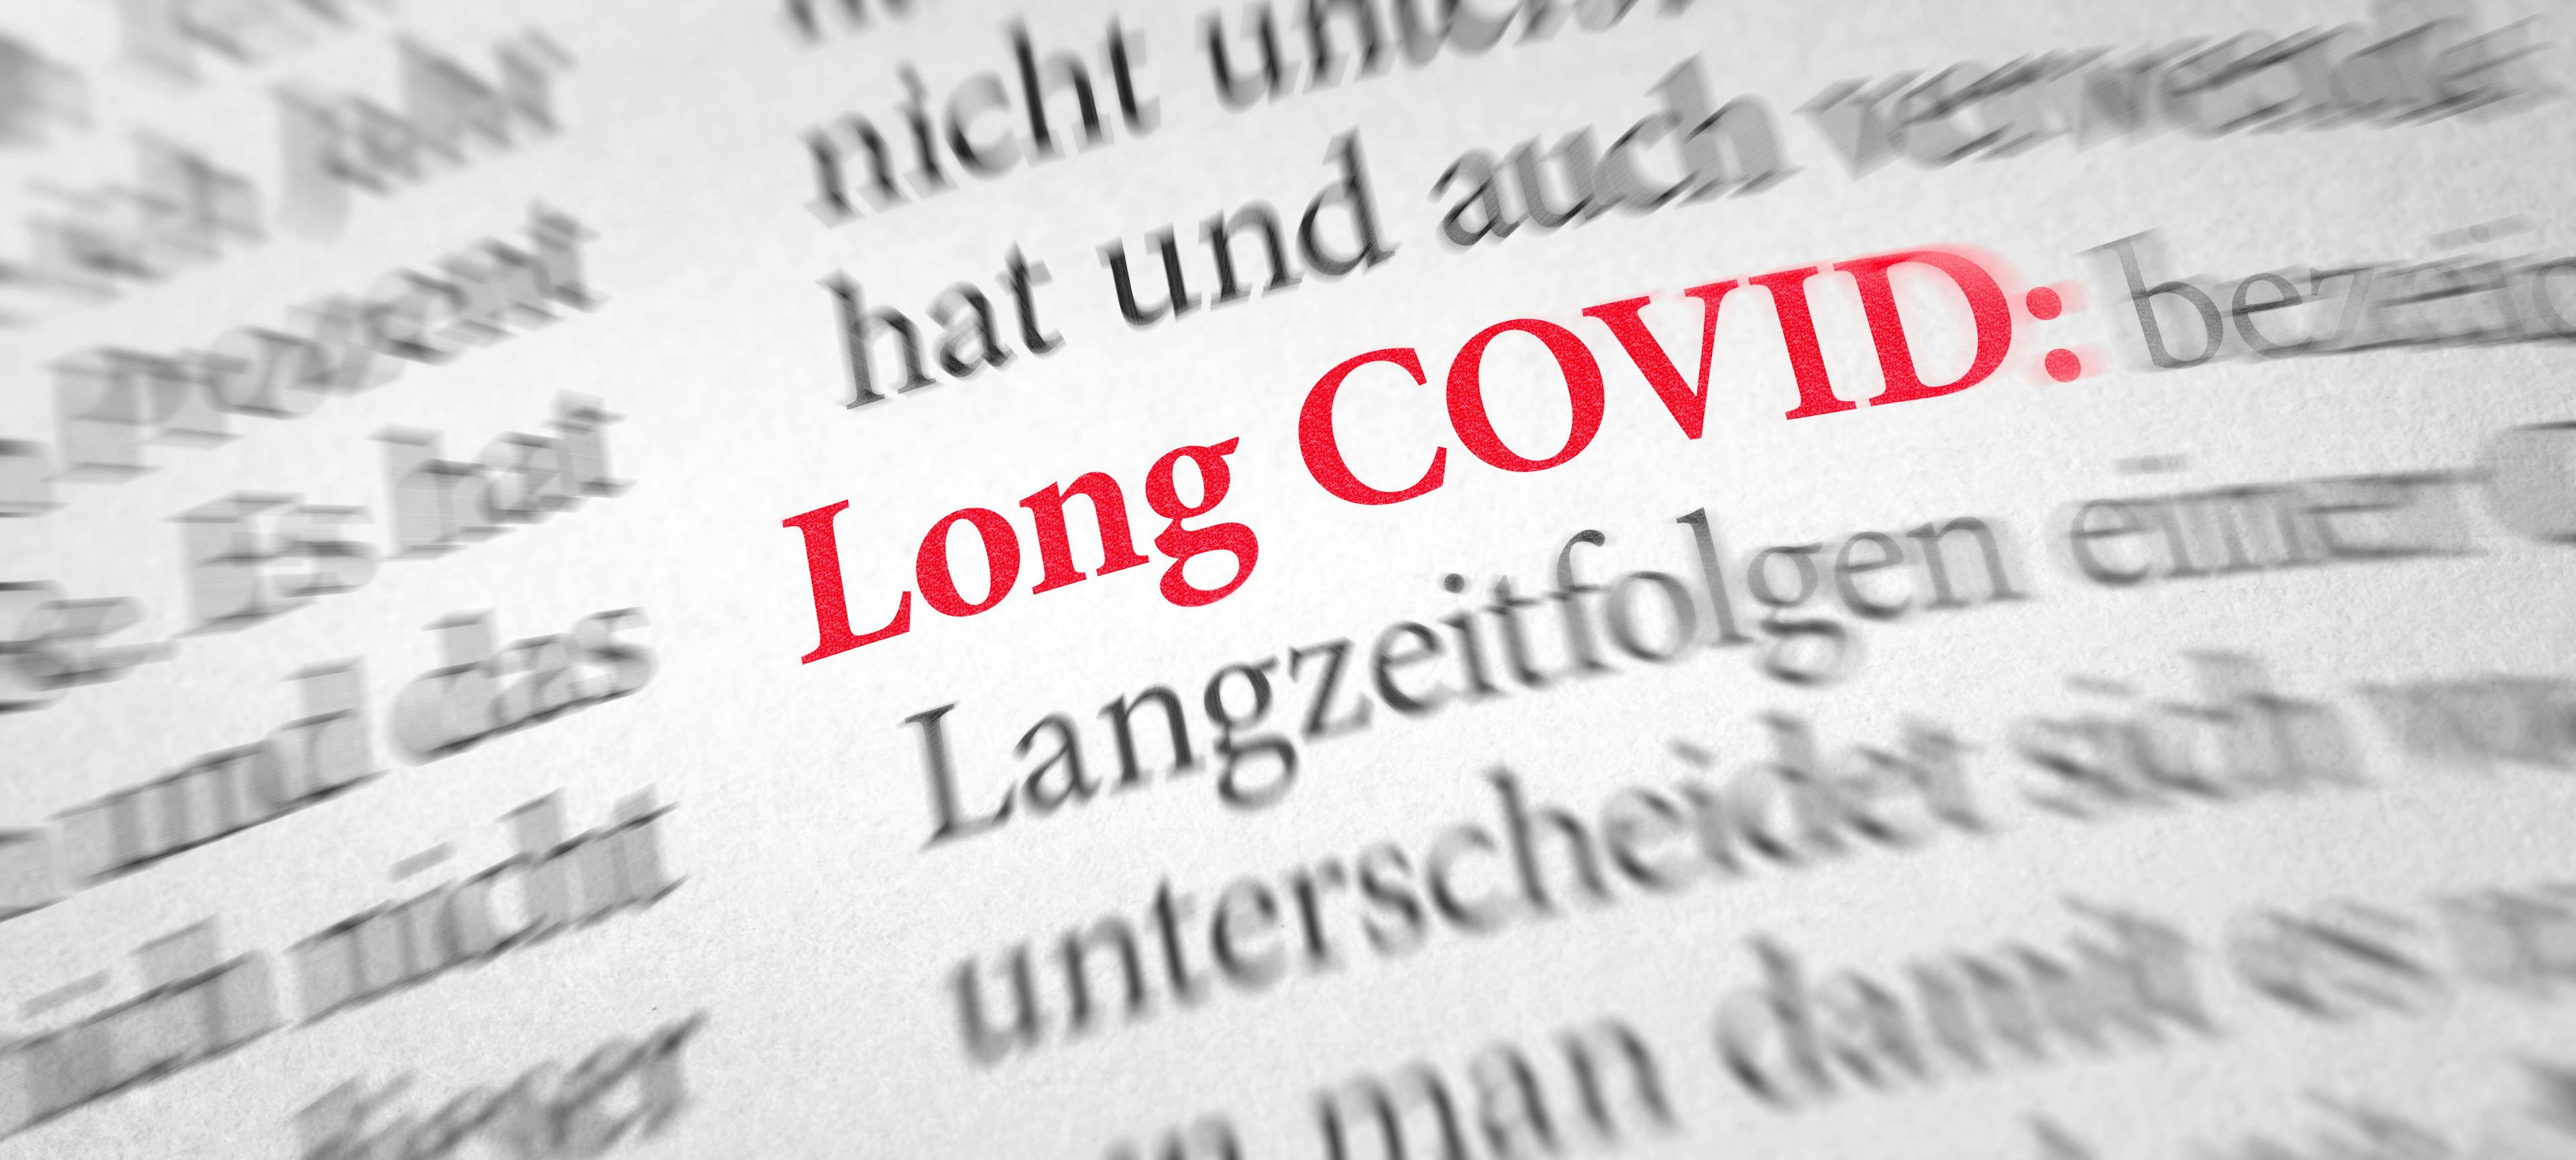 A literature review found we lack a consistent definition of long COVID, which can lead to variance in if and how these patients are treated.  